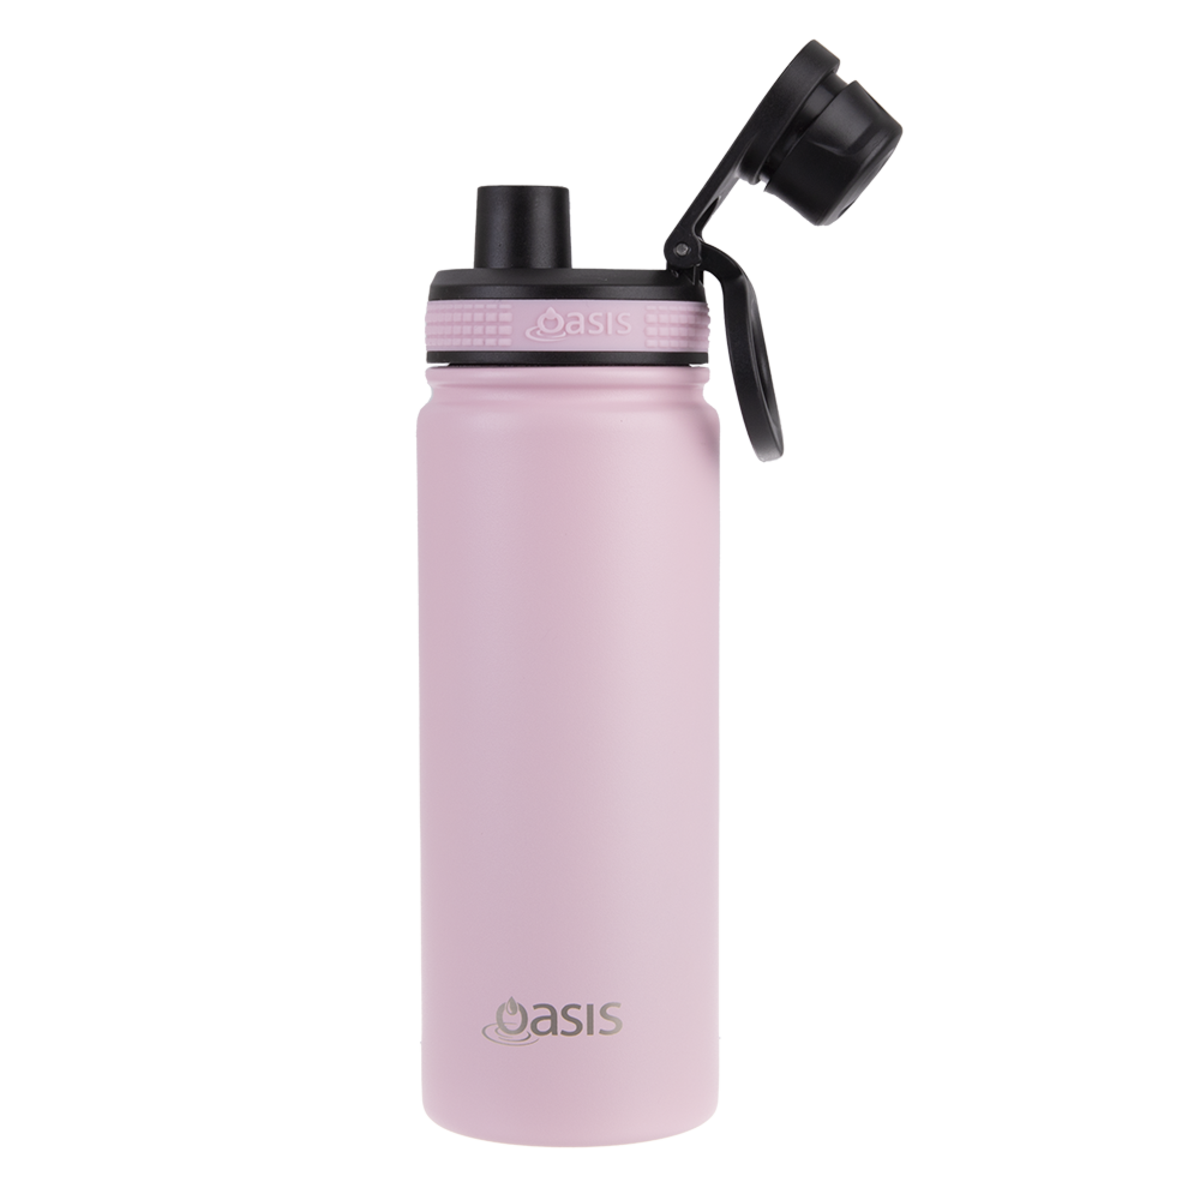 OASIS STAINLESS STEEL DOUBLE WALL INSULATED "CHALLENGER" SPORTS BOTTLE W/ SCREW CAP 550ML - Carnation